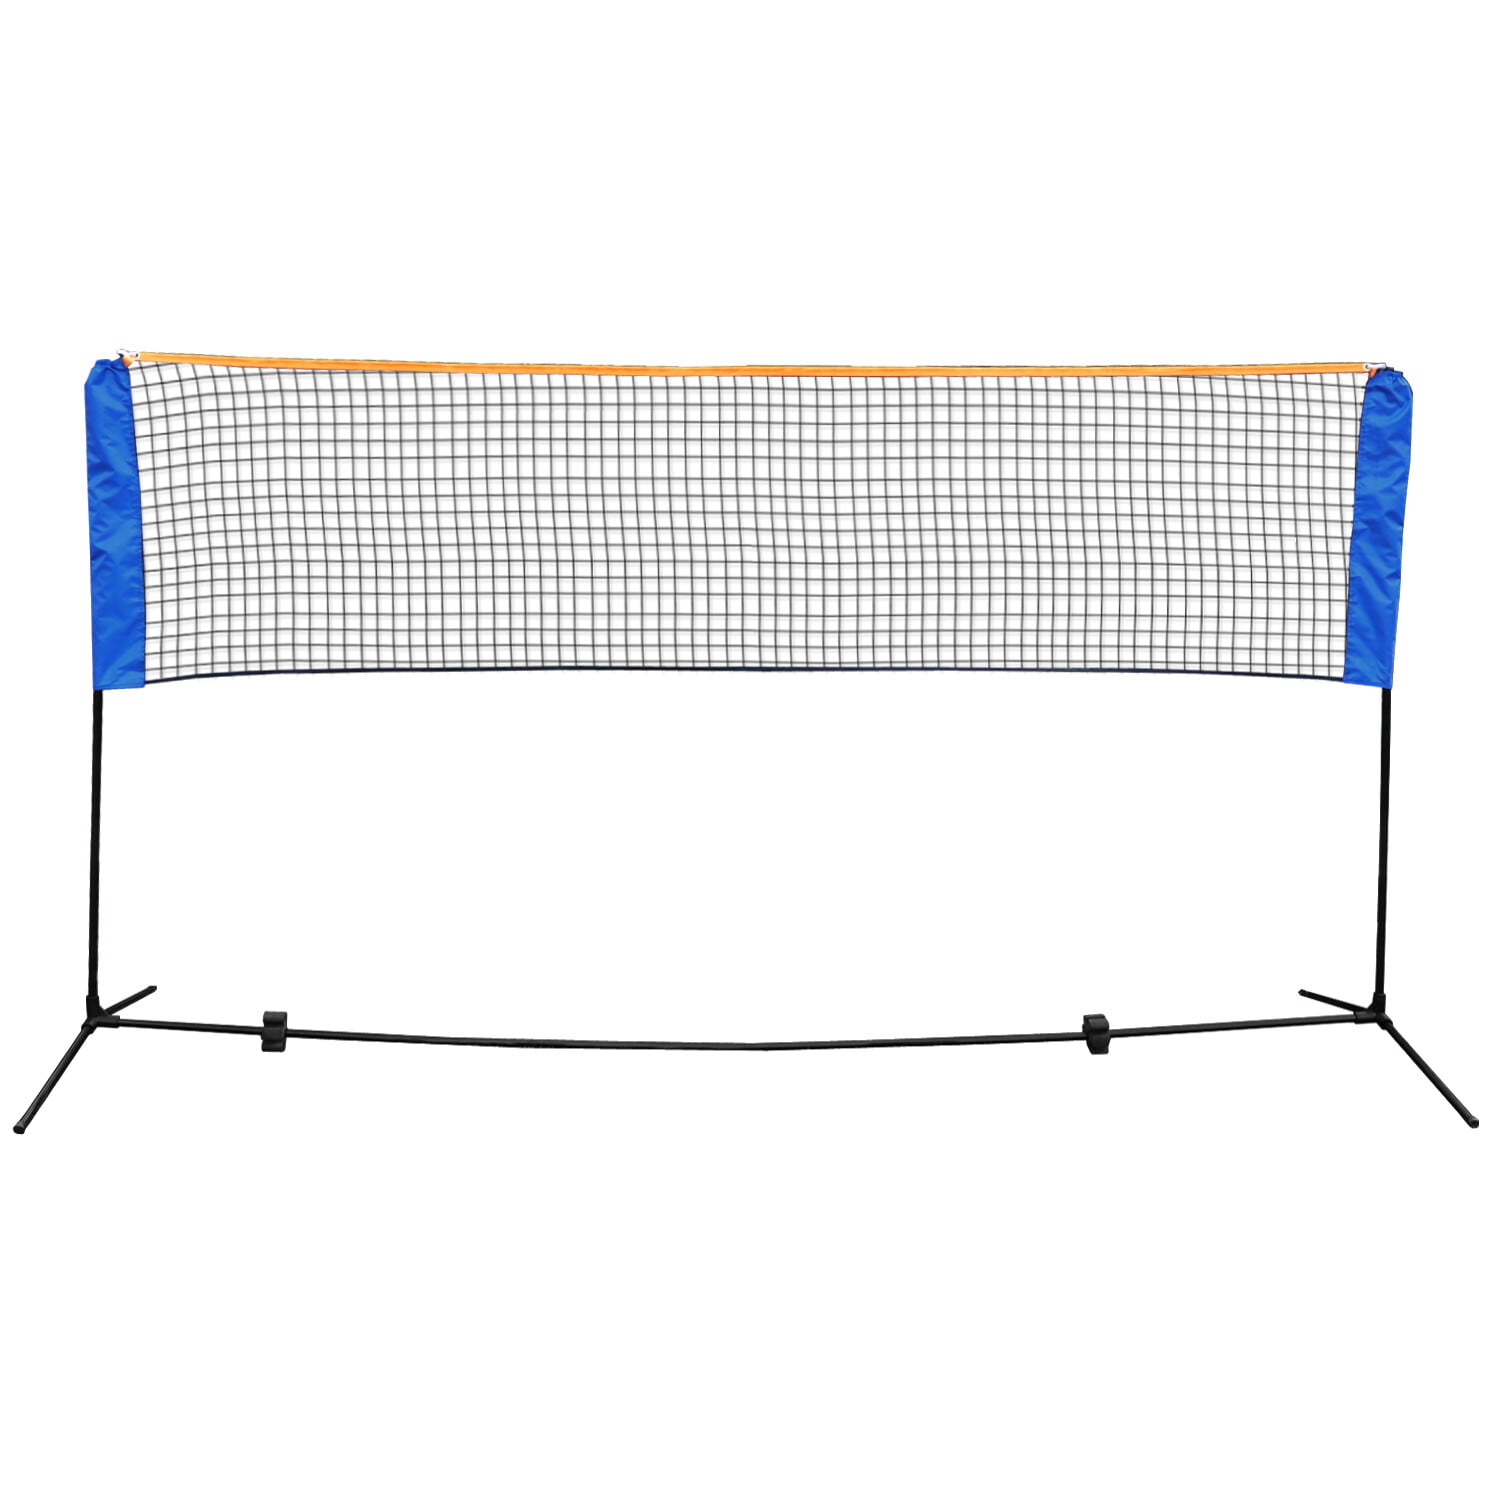 Large 5m Adjustable Mini Foldable Badminton Tennis Volleyball Net for Outdoor 